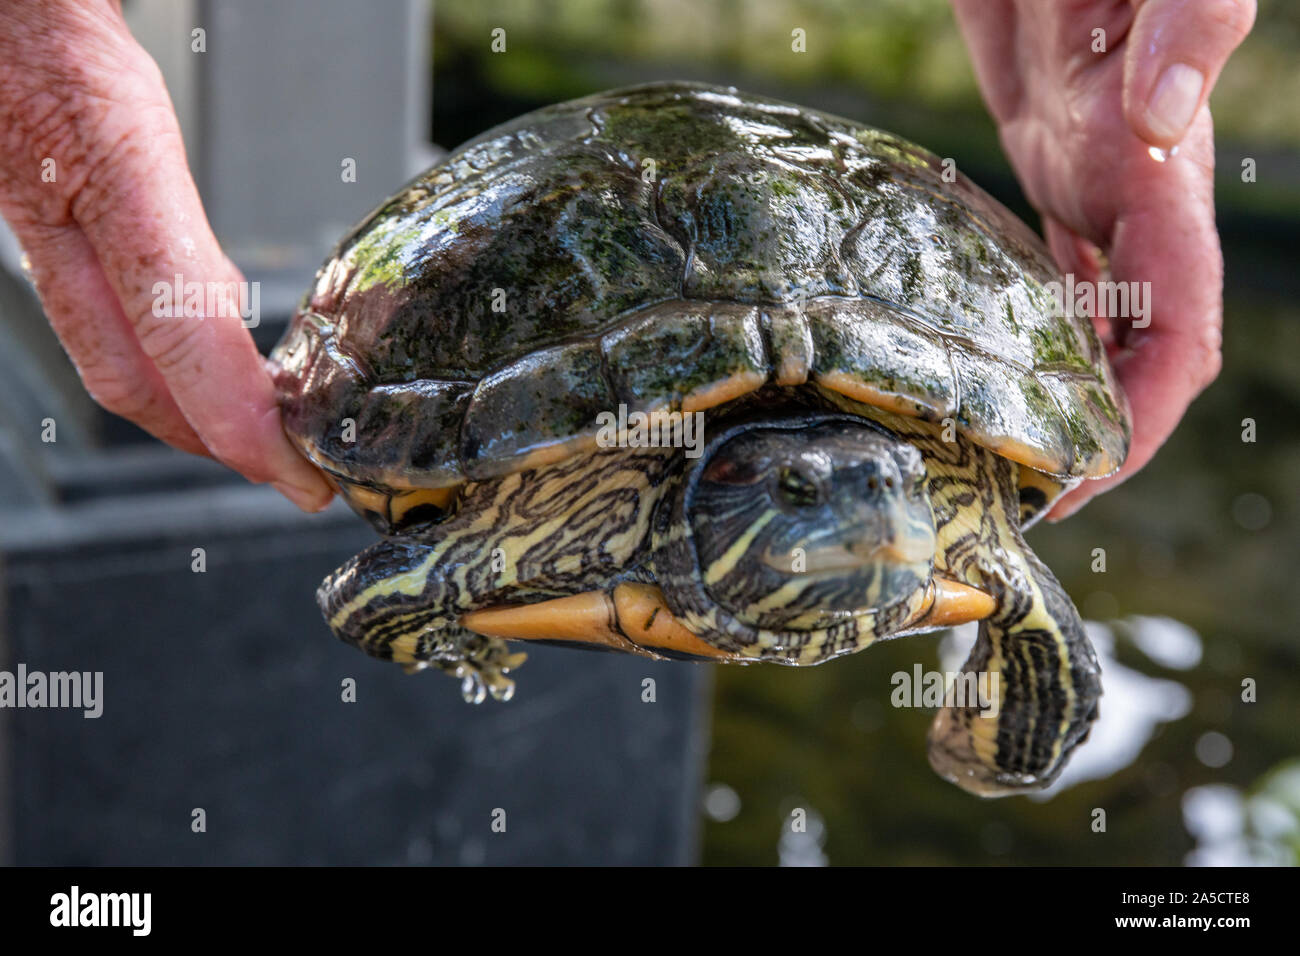 Small tortoise being placed in the garden pond Stock Photo